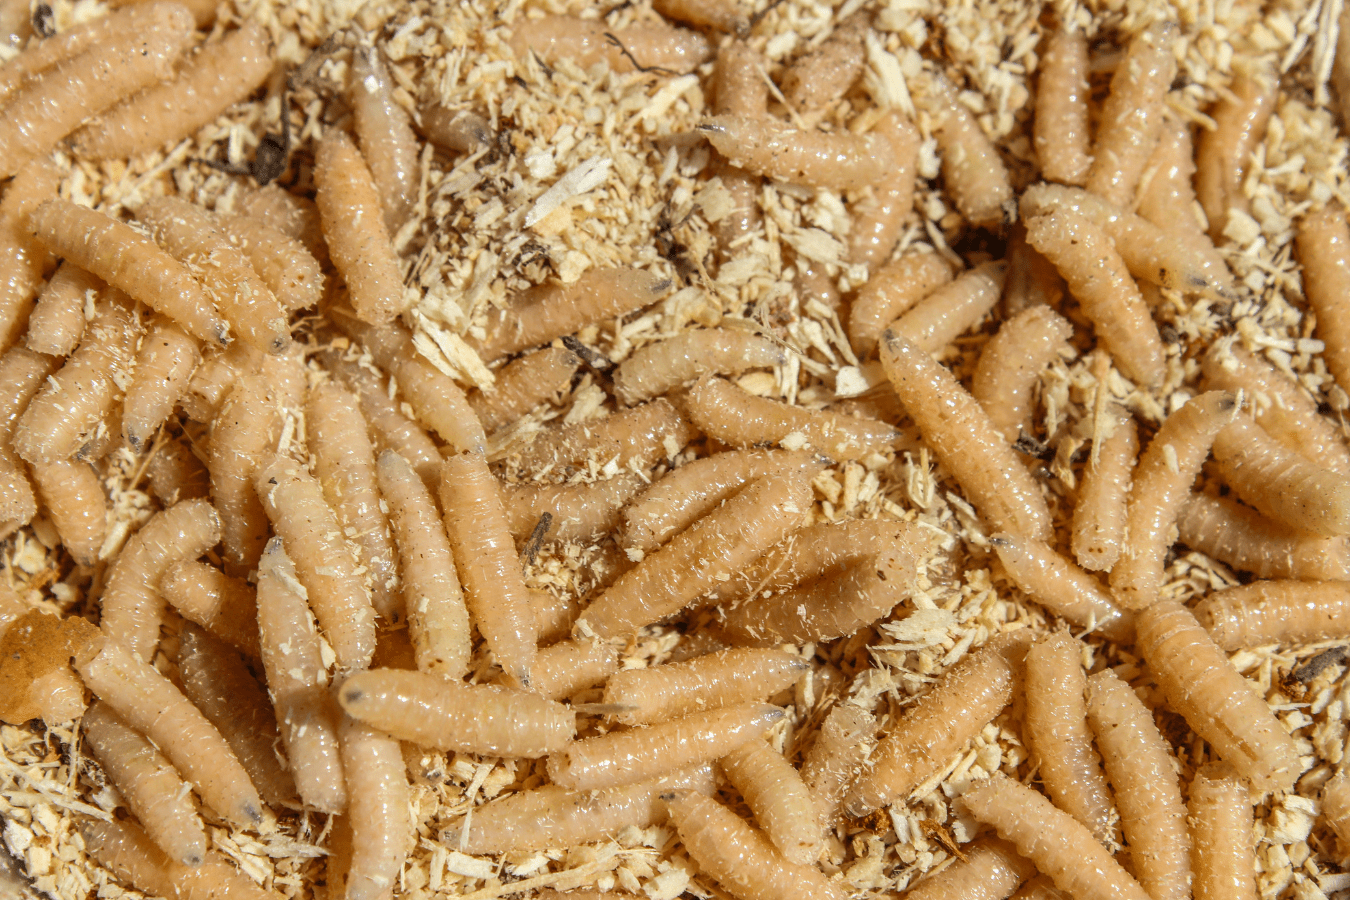 What Does It Mean to Dream of Maggots?